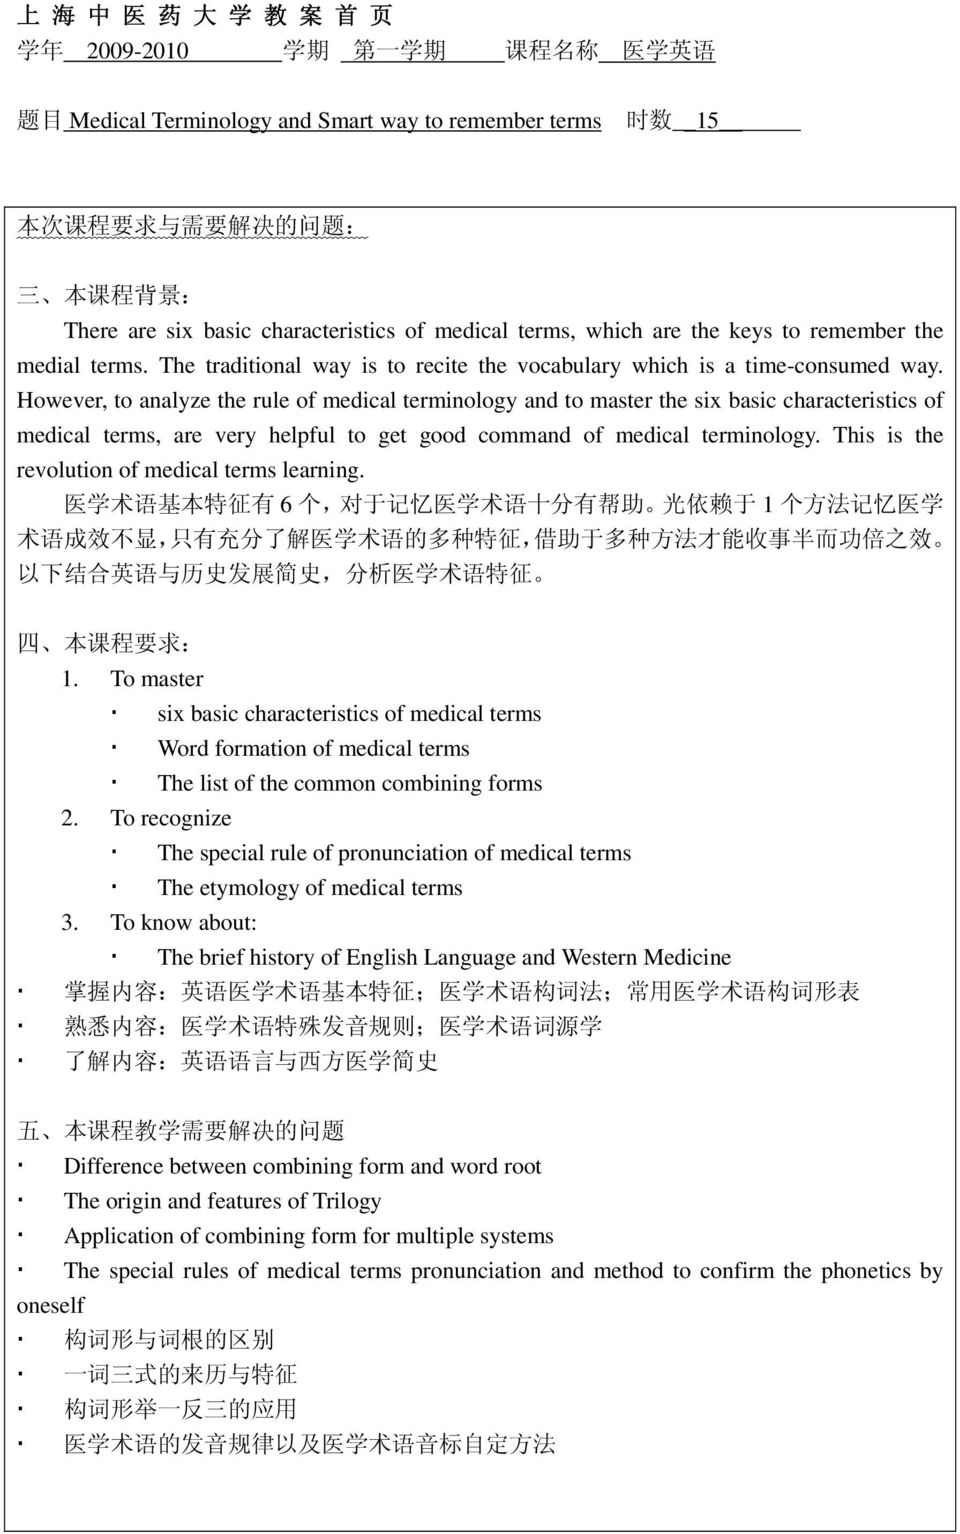 However, to analyze the rule of medical terminology and to master the six basic characteristics of medical terms, are very helpful to get good command of medical terminology.